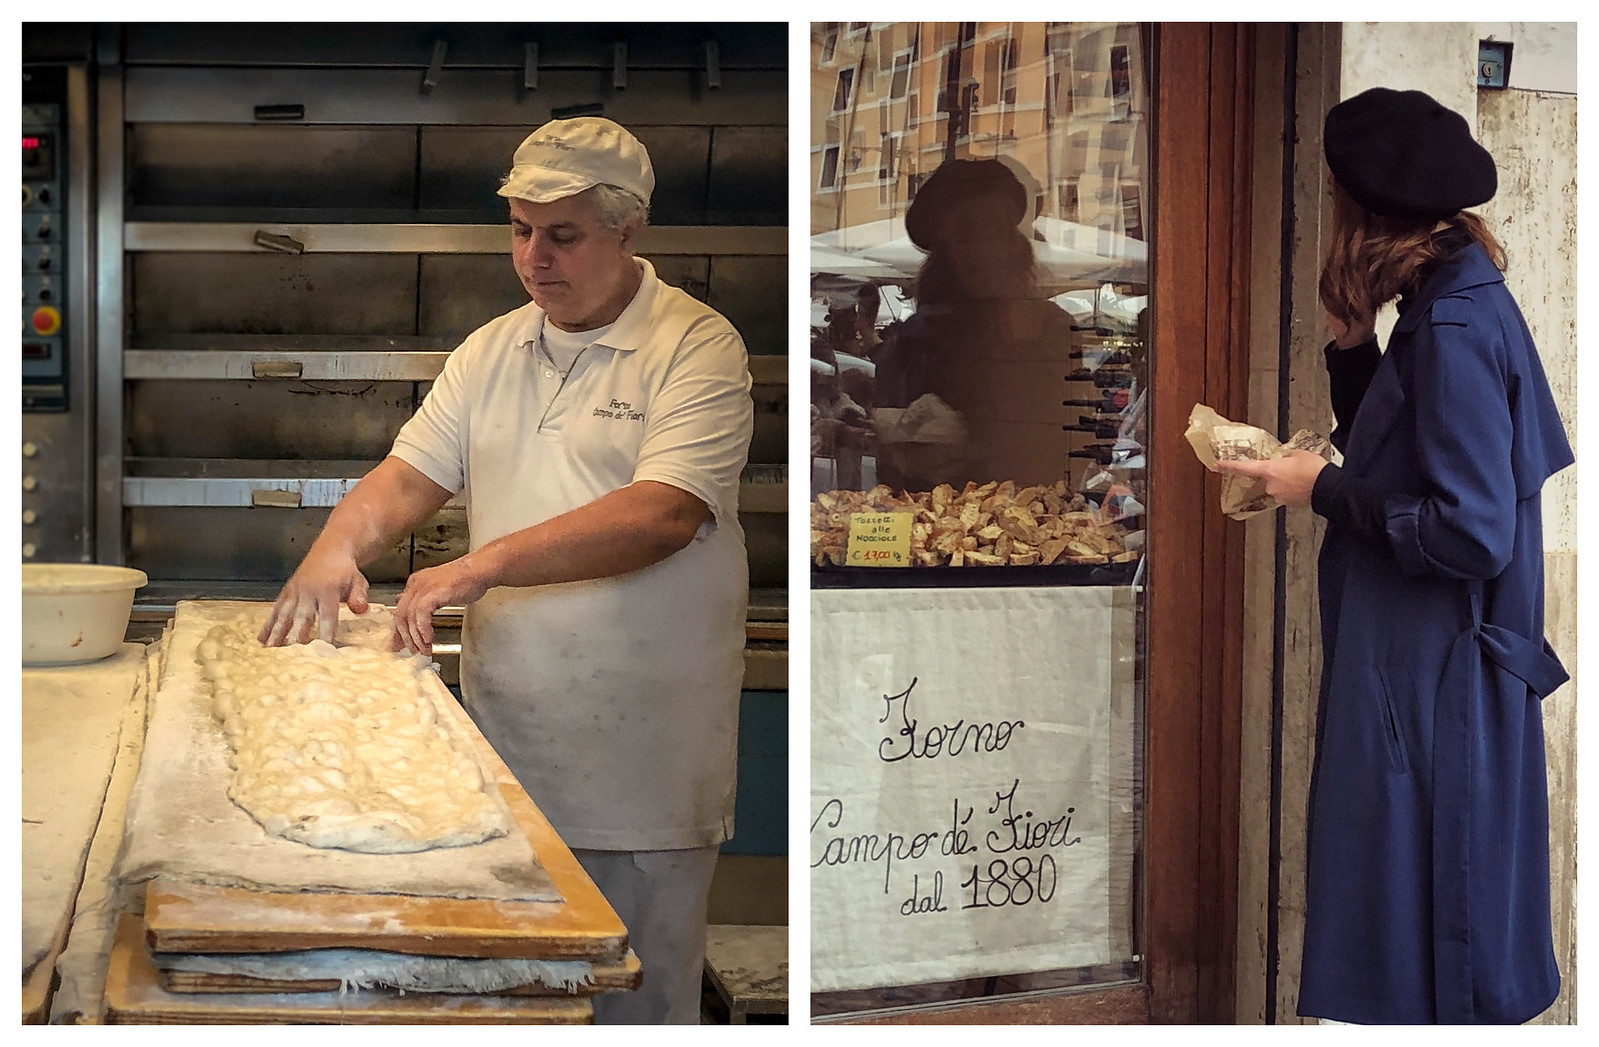 pizza slabs is a classic street food in Rome